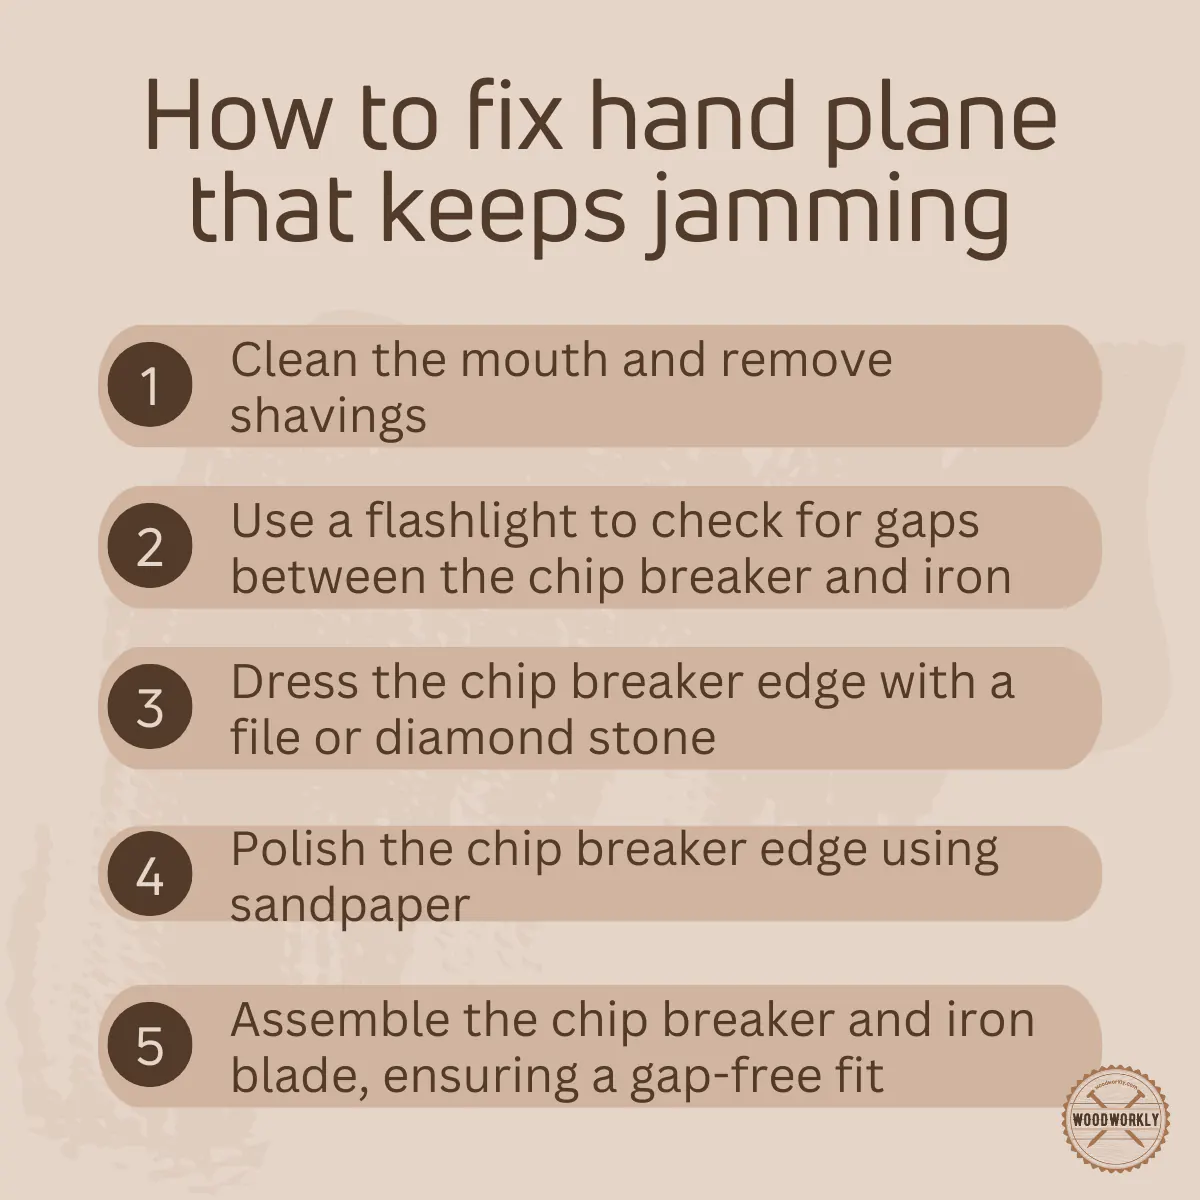 How to fix hand plane that keeps jamming